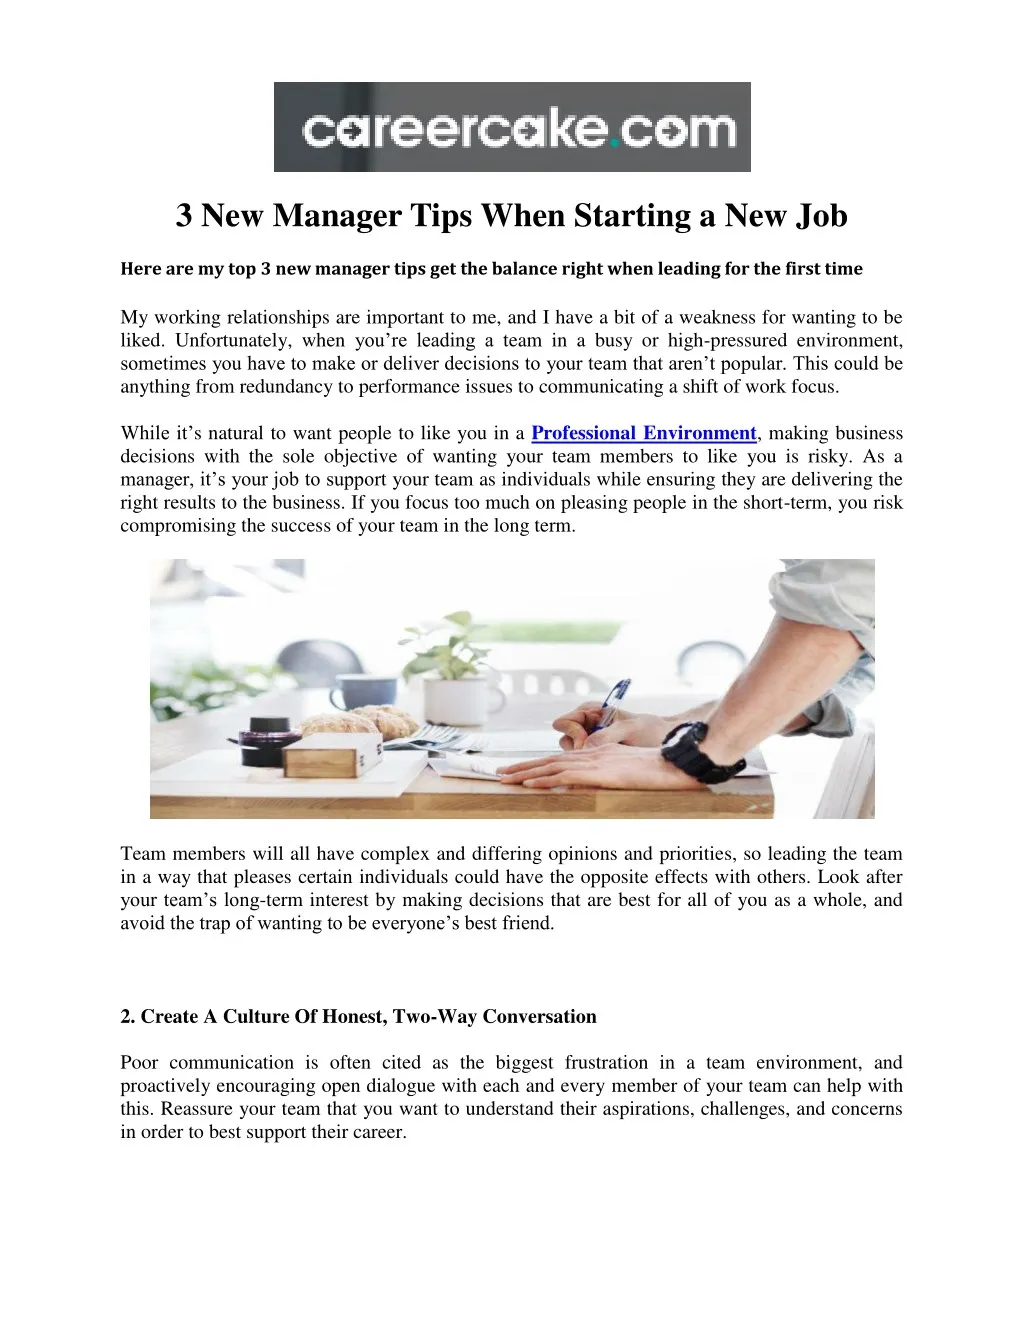 3 new manager tips when starting a new job